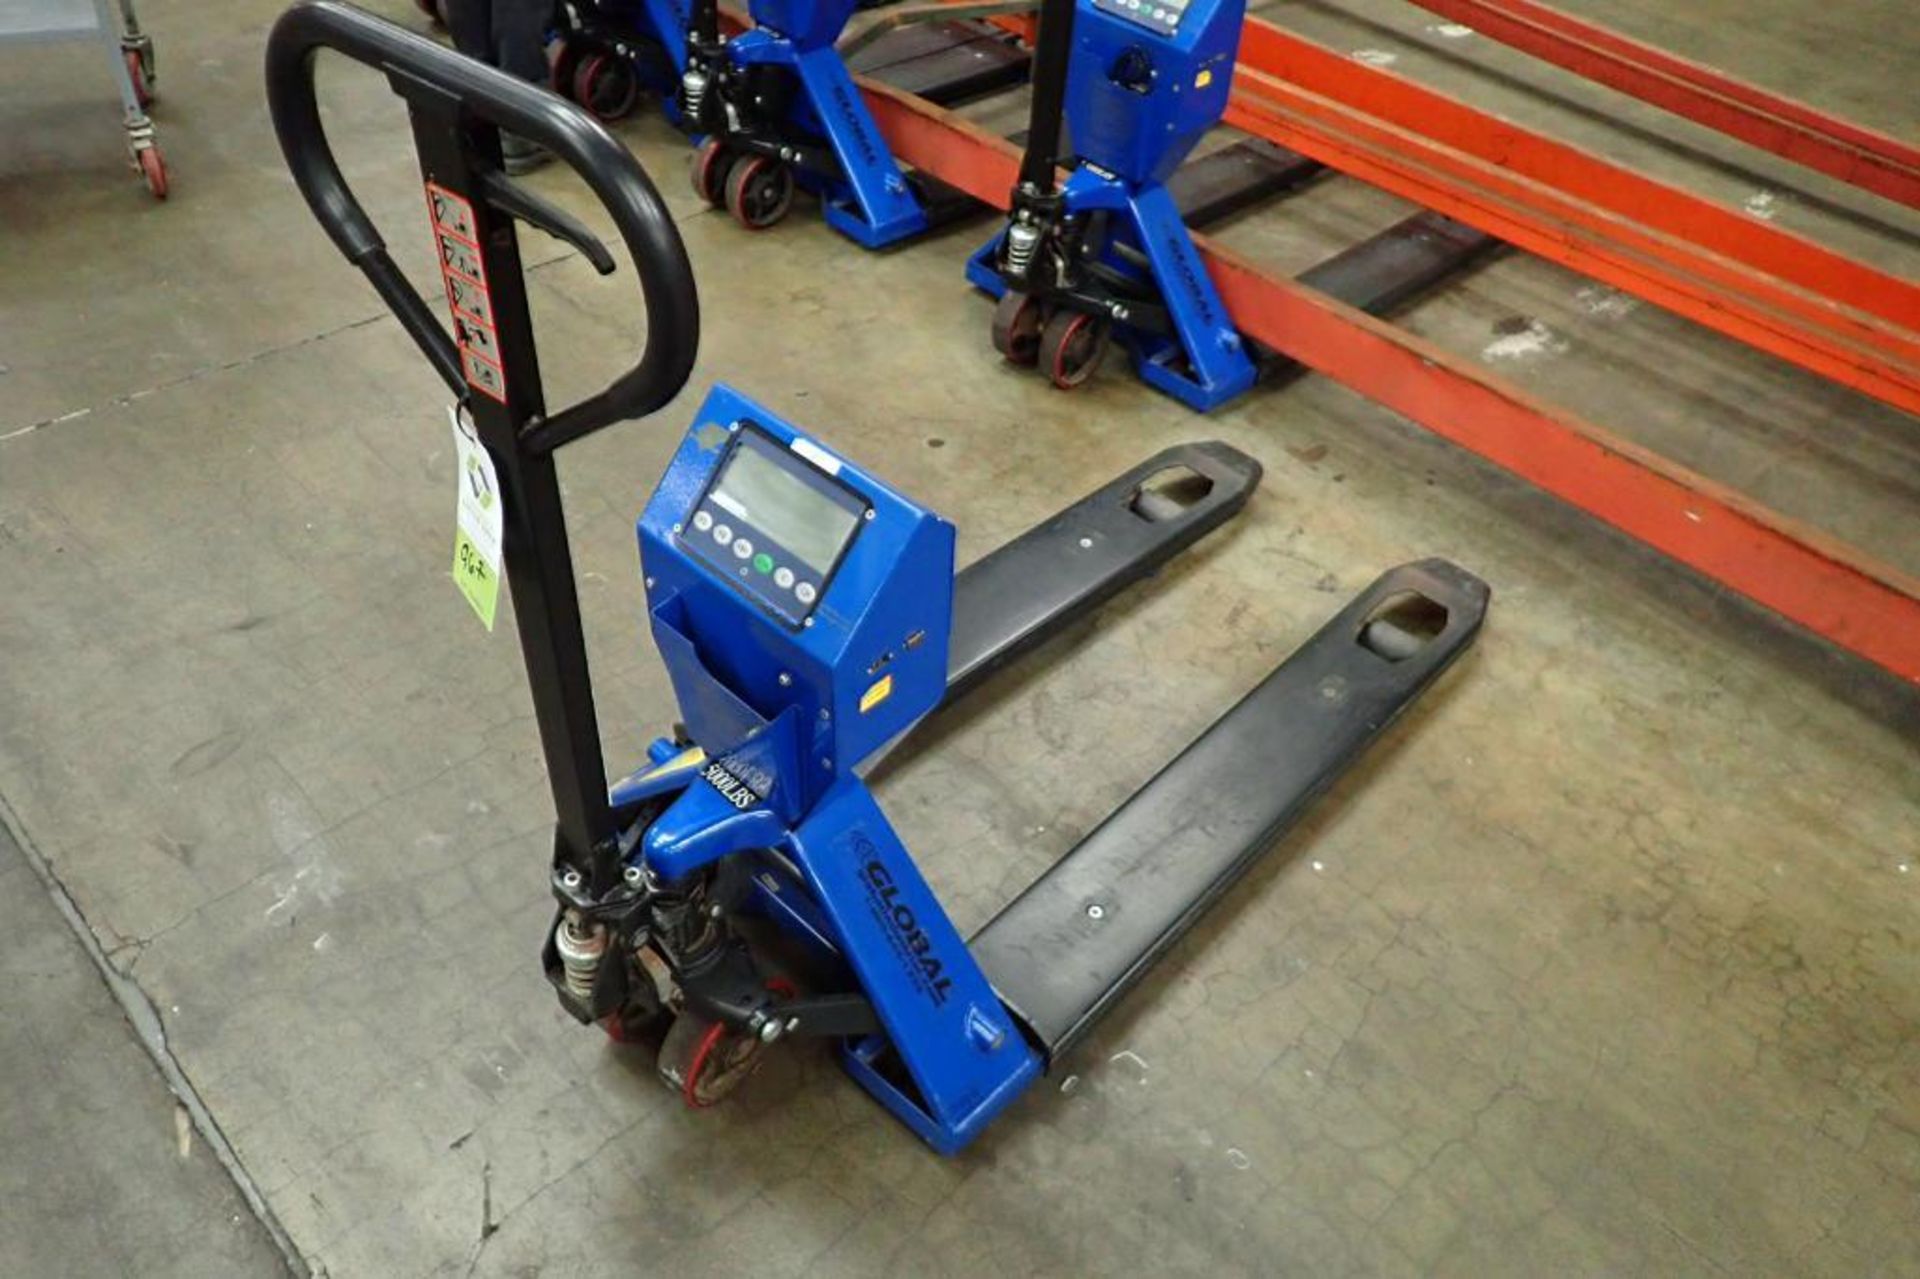 Global Industrial hand pallet jack, SN 377828, with Mettler Toledo on board scale, 5000 lb capacity,